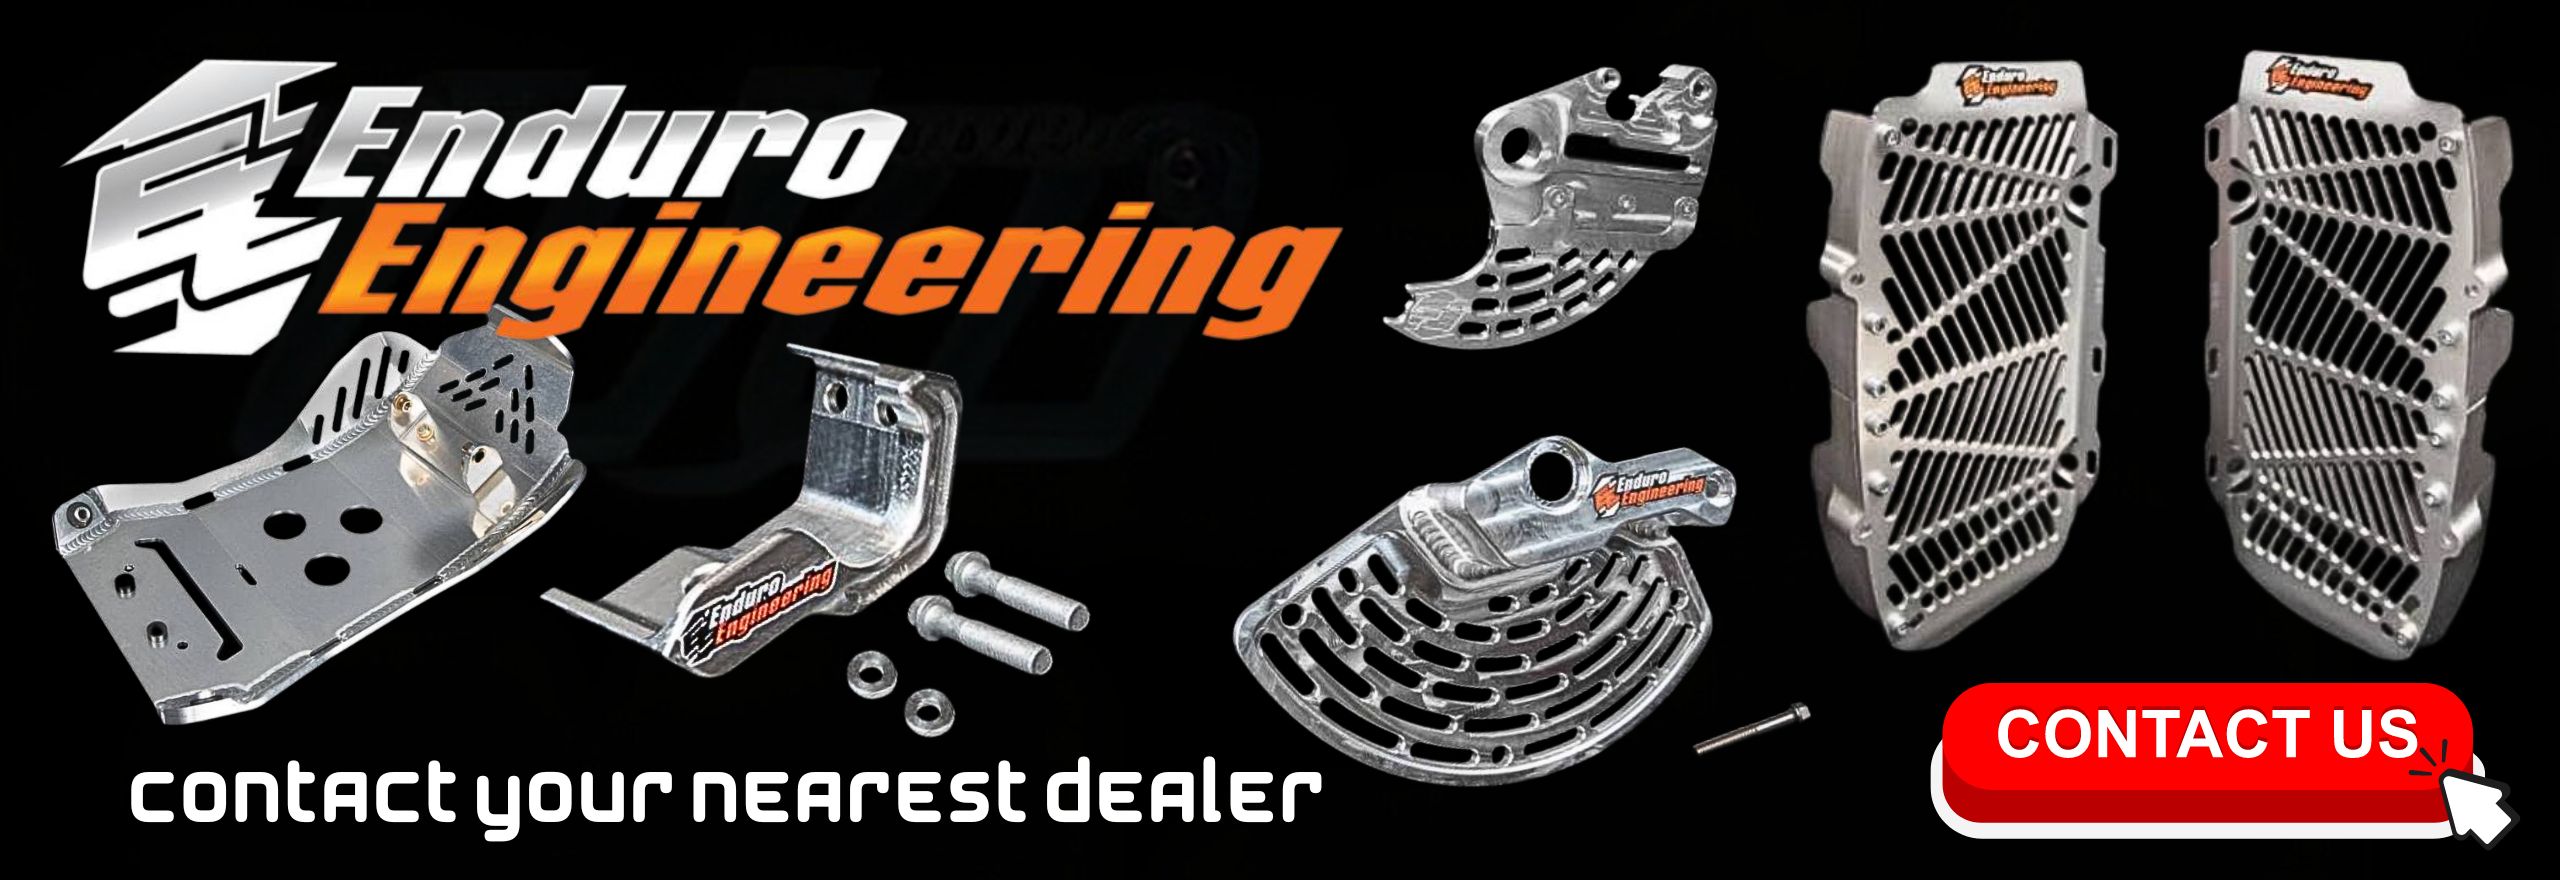 We are importers and distributors of quality MX and Off-Road motorcycle parts. We distribute our products through reputable dealerships throughout Southern Africa. motorcycle protection.